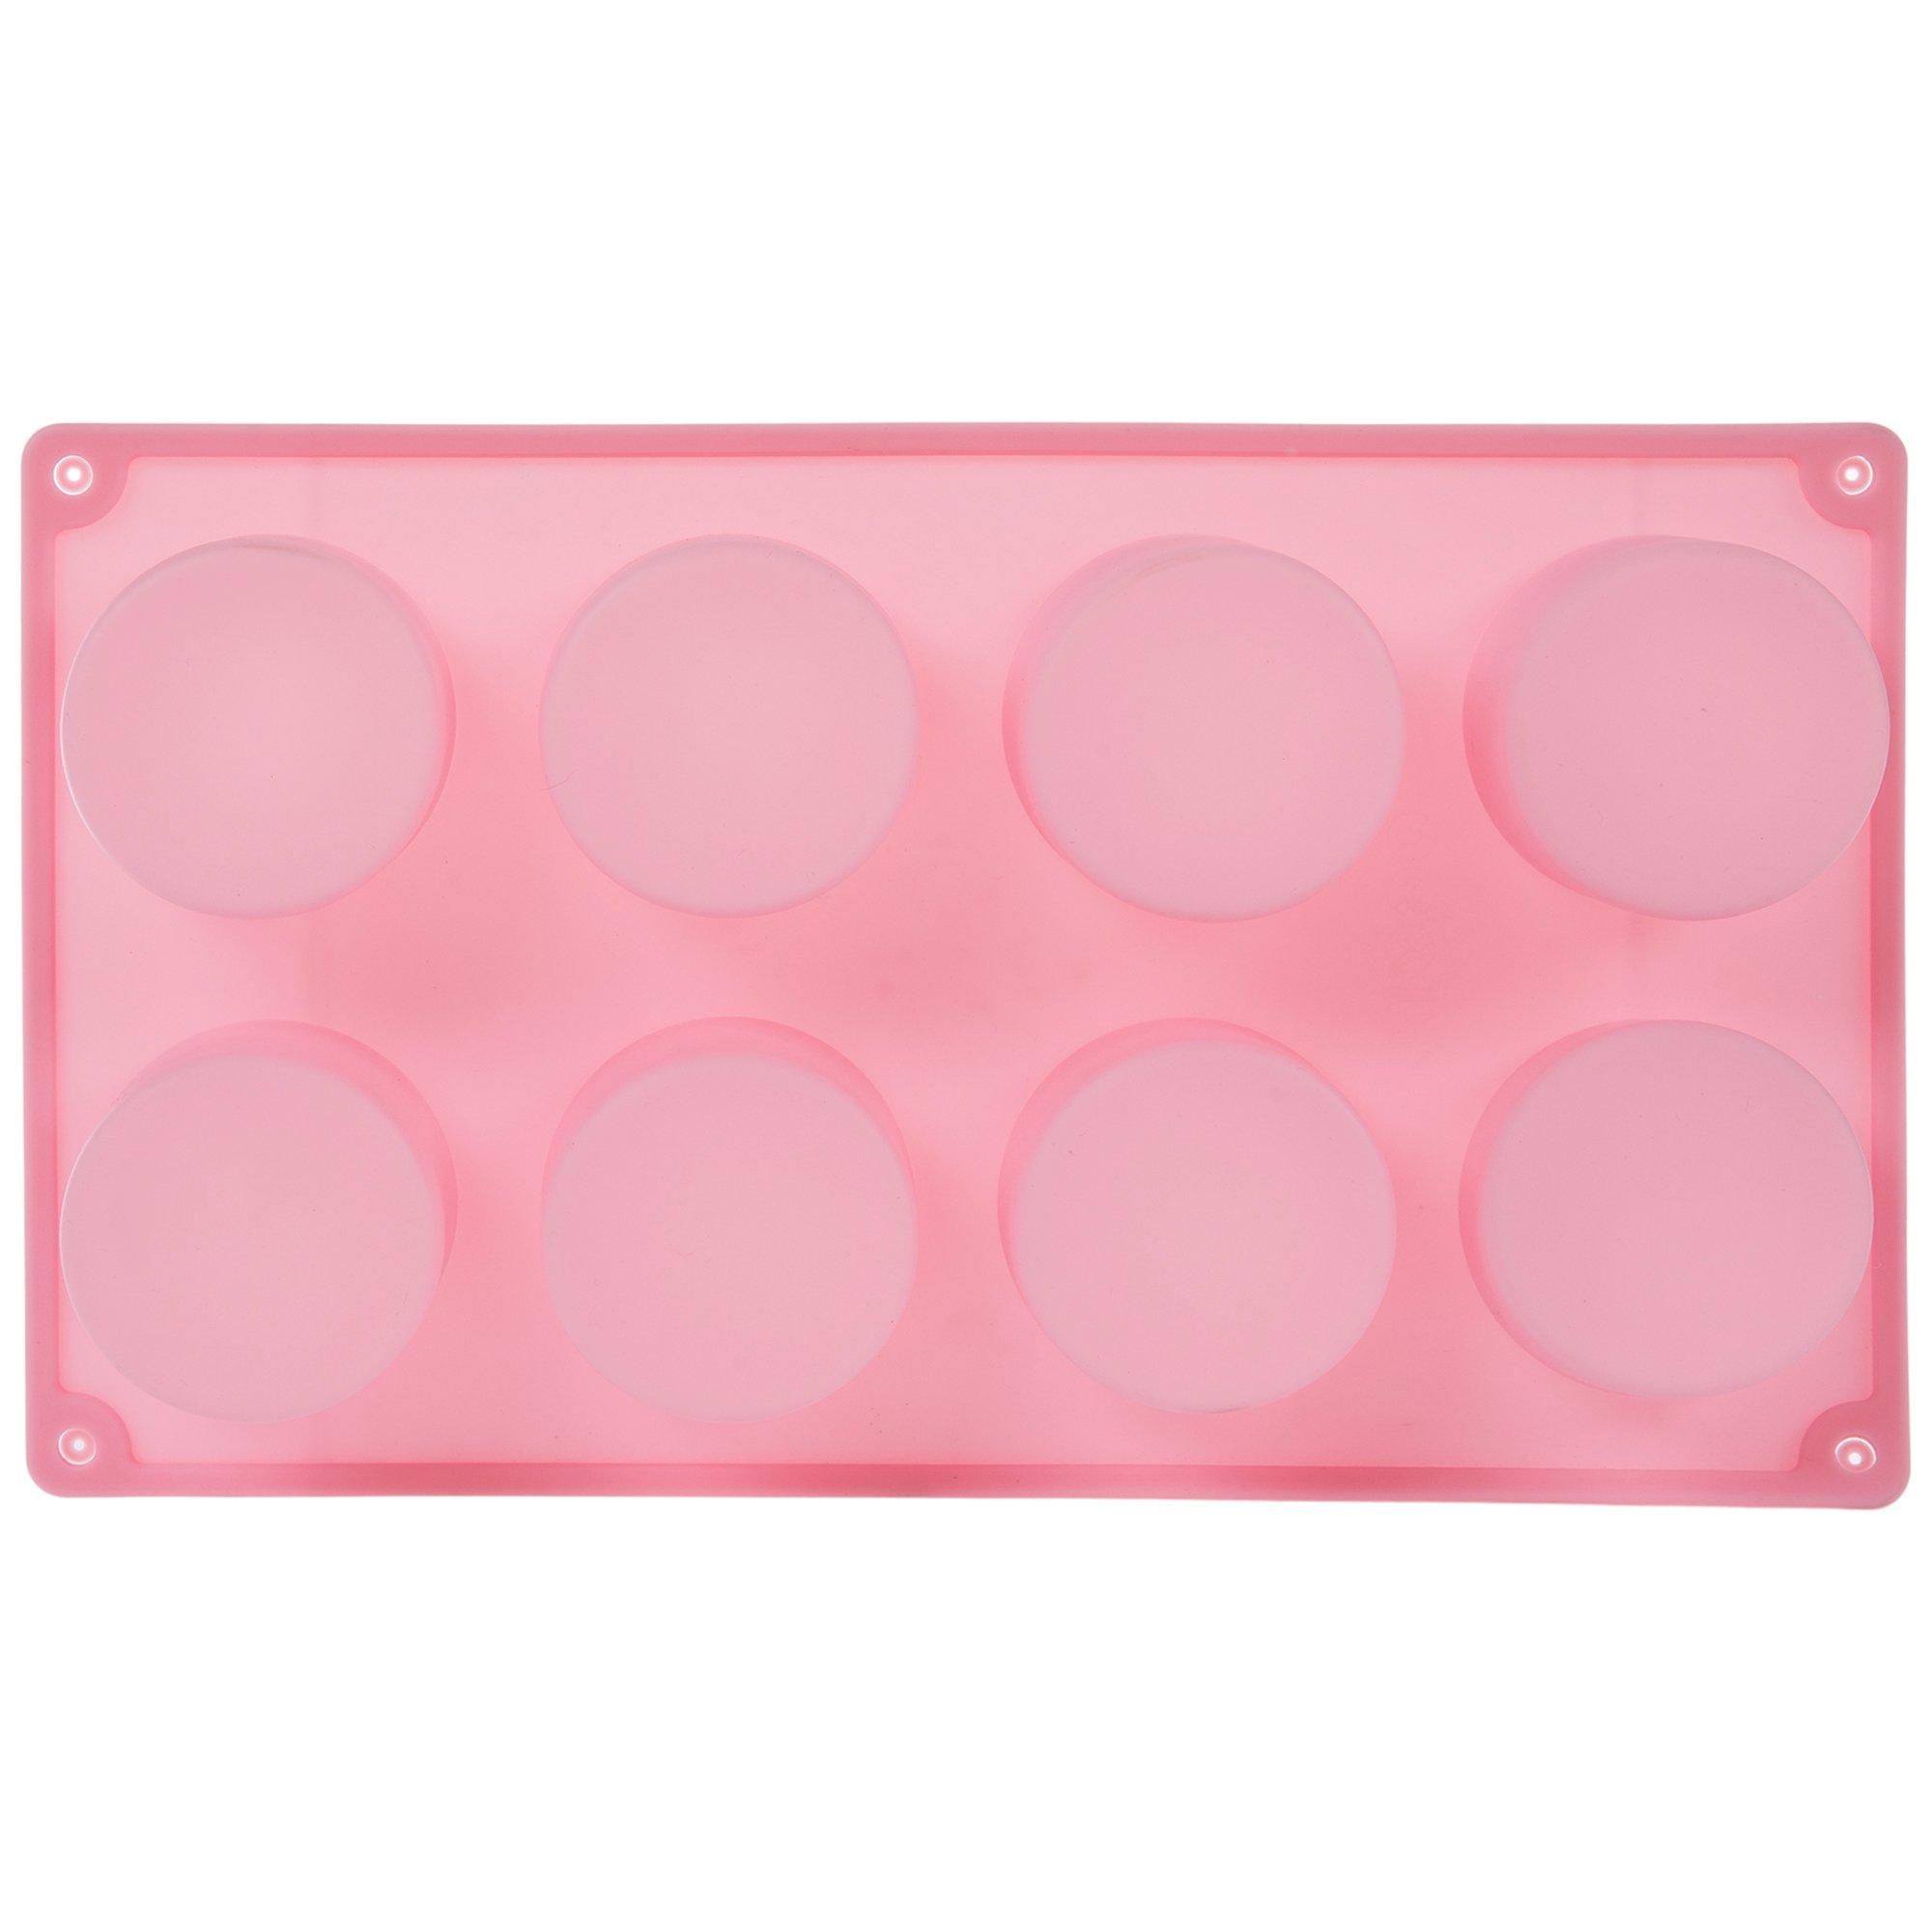 Freshware 15-cavity Mini Cylinder Silicone Mold/ Baking Pans (Pack of 2) -  Bed Bath & Beyond - 5992406